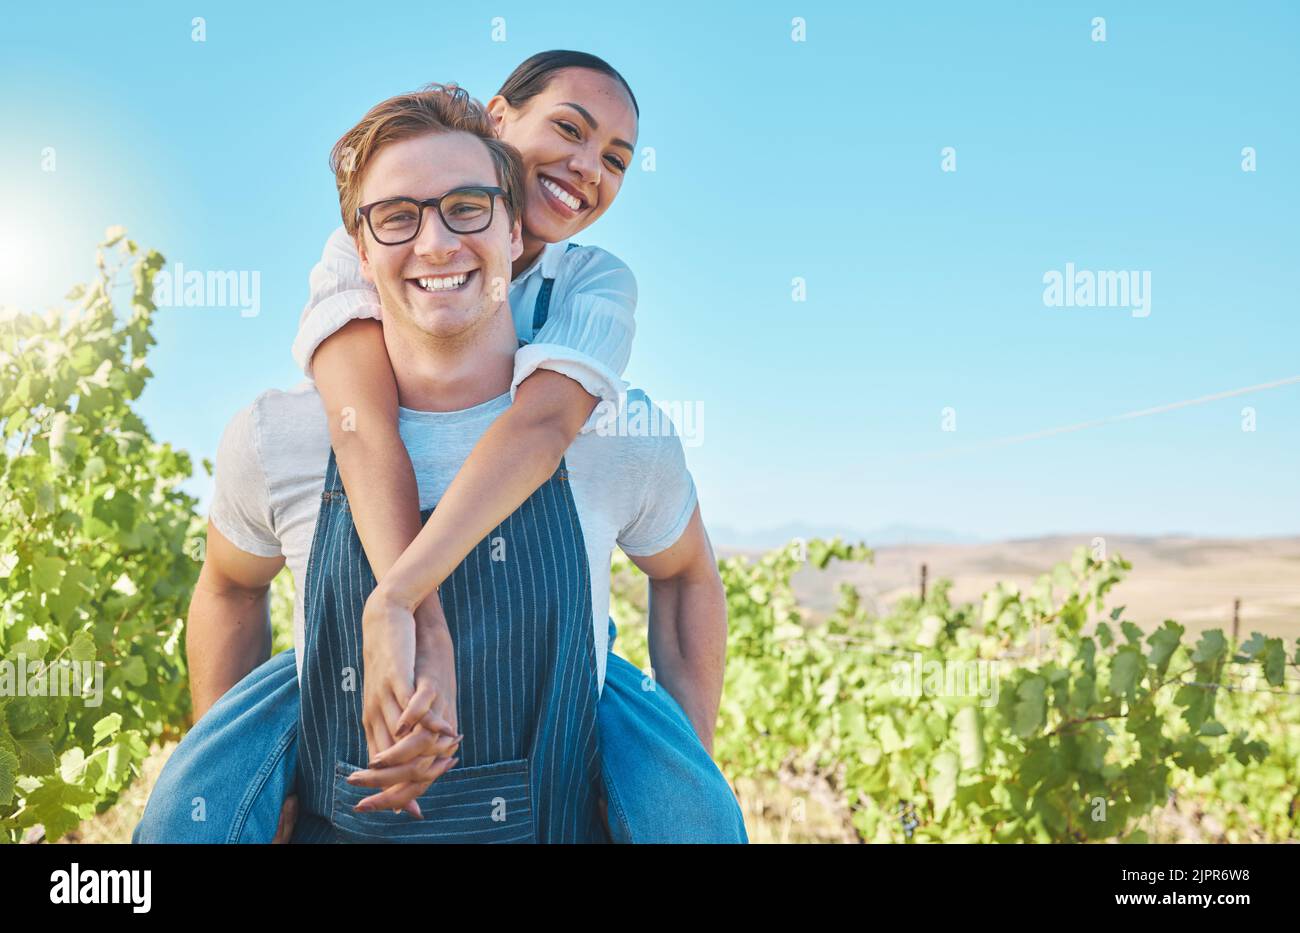 Happy and playful interracial farming couple with smile bonding with piggy back. Business people, man and woman agriculture worker in farming industry Stock Photo